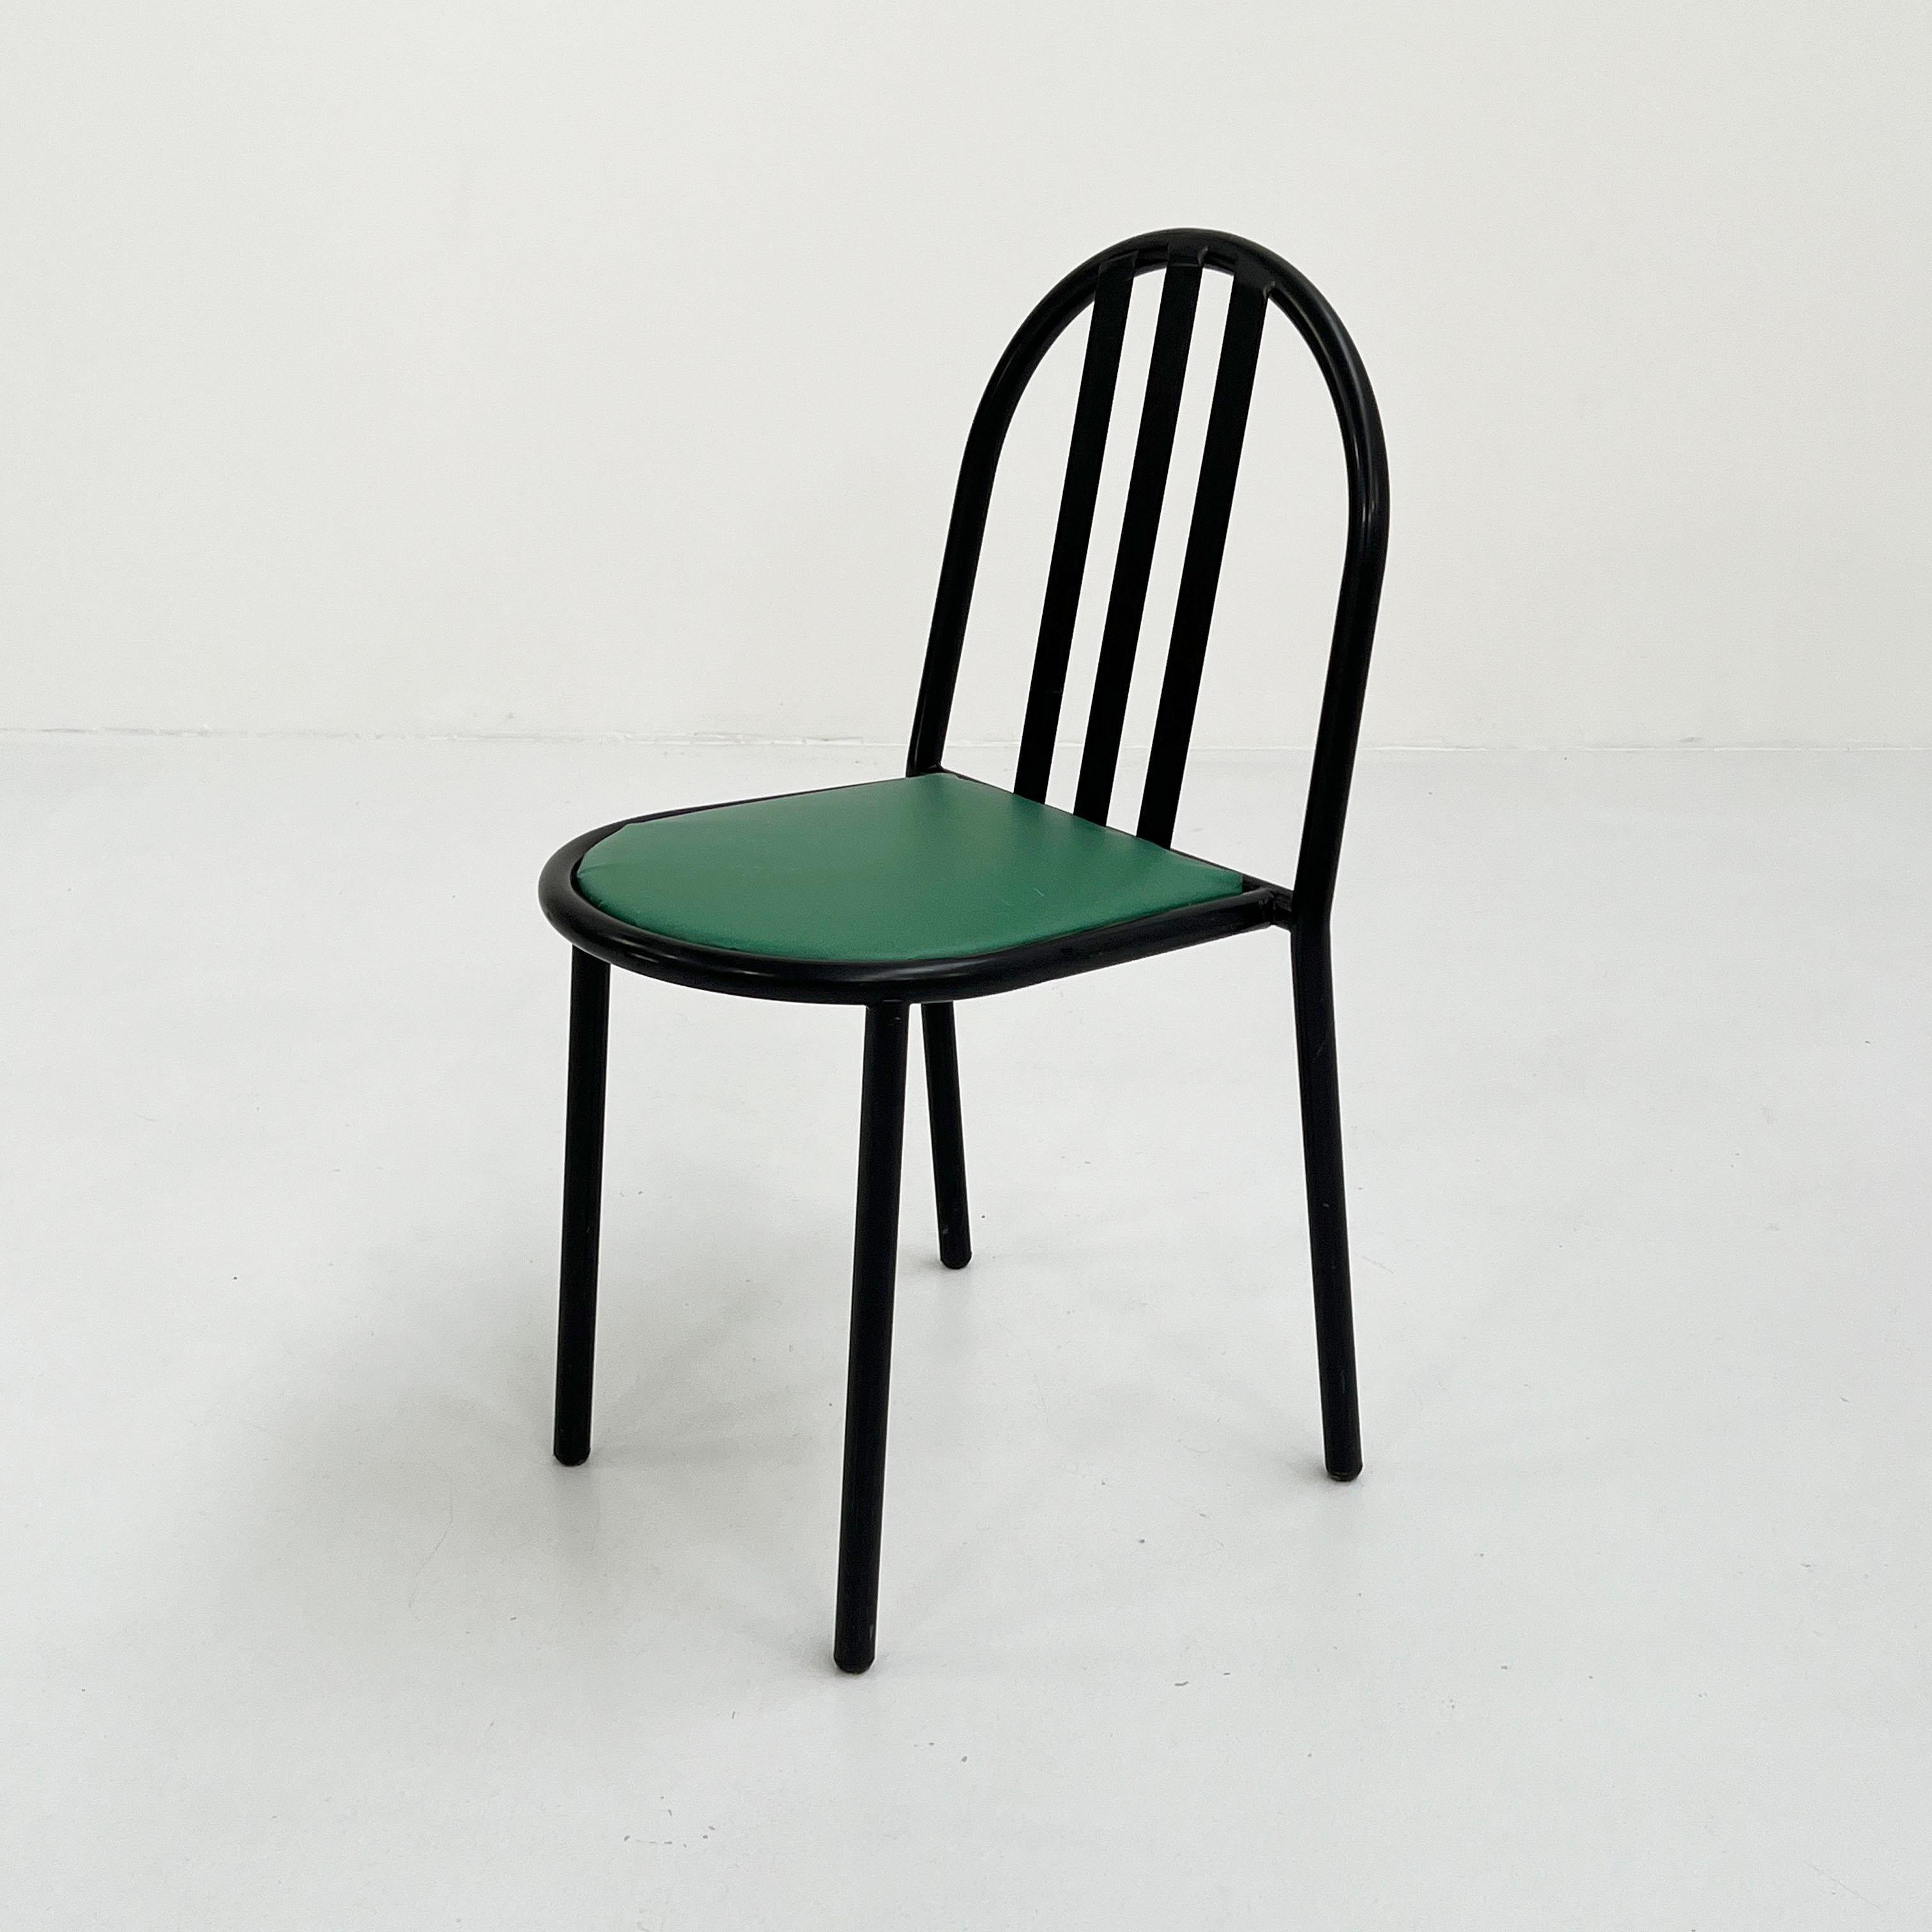 Mid-Century Modern No.222 Chair with Green Seat by Robert Mallet-Stevens for Pallucco Italia, 1980s